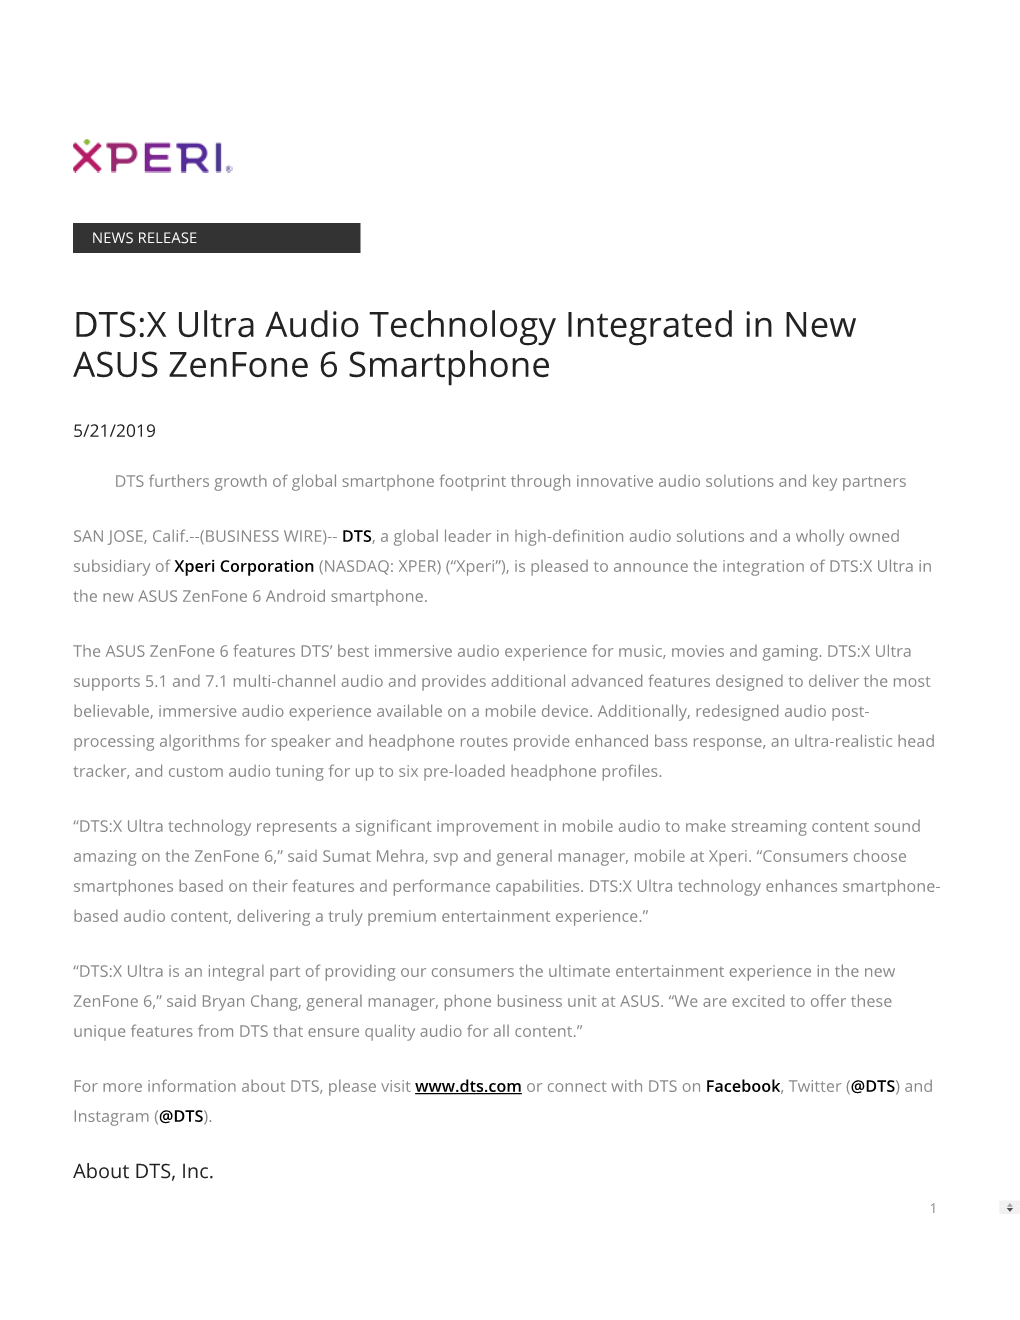 DTS:X Ultra Audio Technology Integrated in New ASUS Zenfone 6 Smartphone